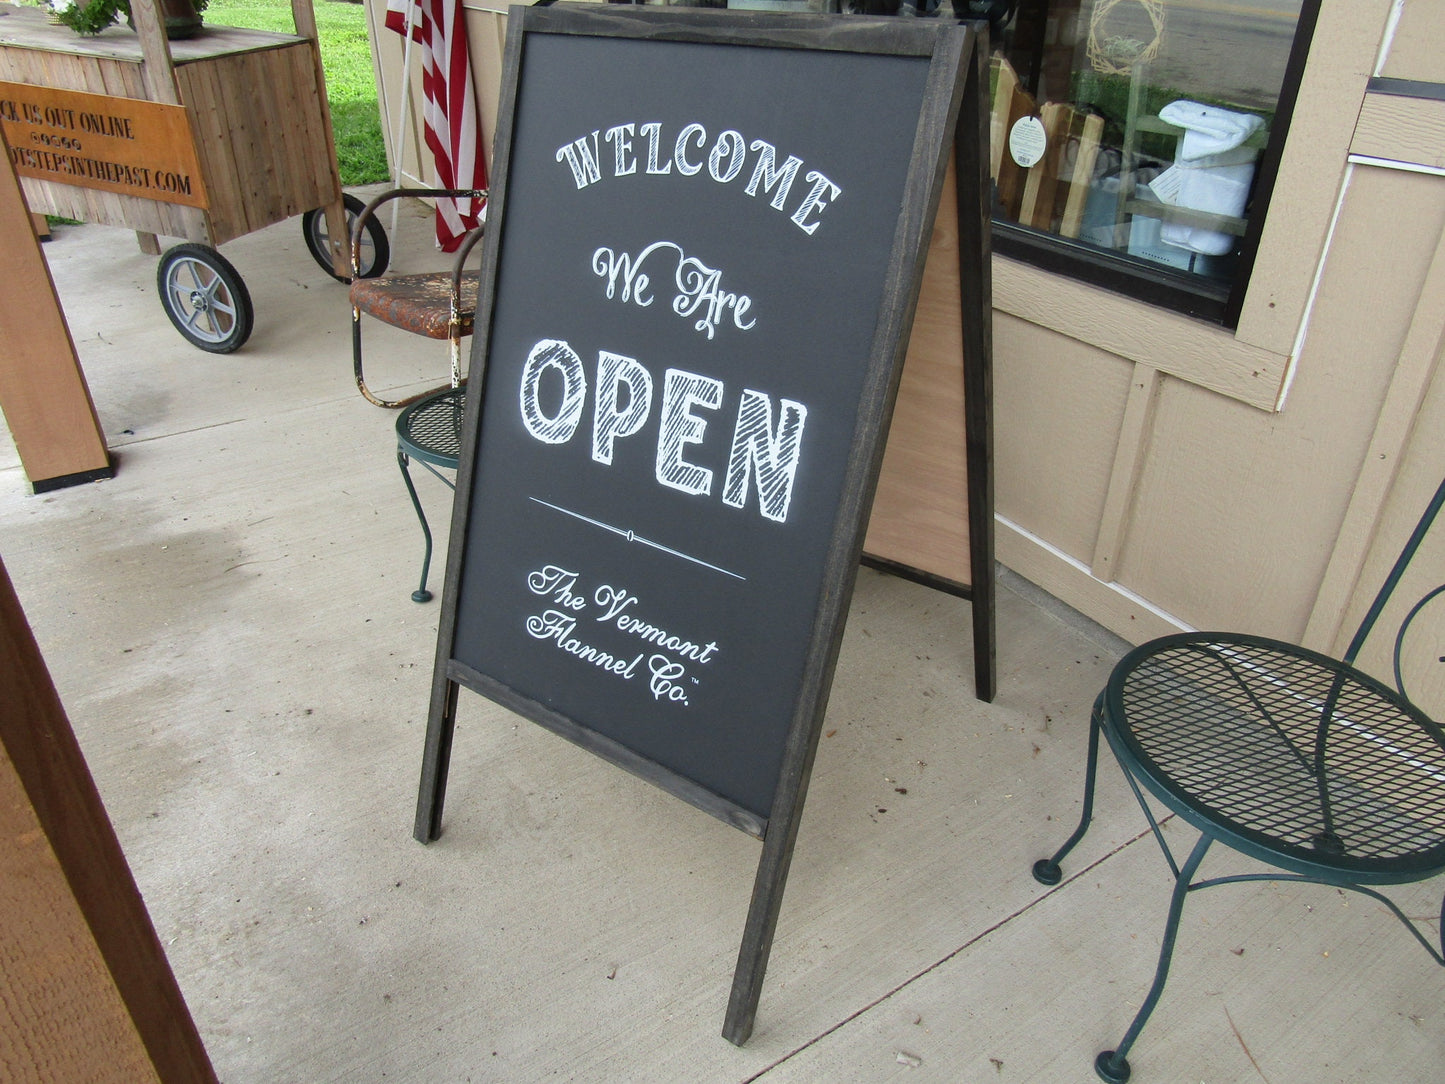 Welcome We Are Open A Frame Freestanding Sign Flannel Company Vermont Small shop Sidewalk Store Front Sign Wooden Sign Chalkboard Style